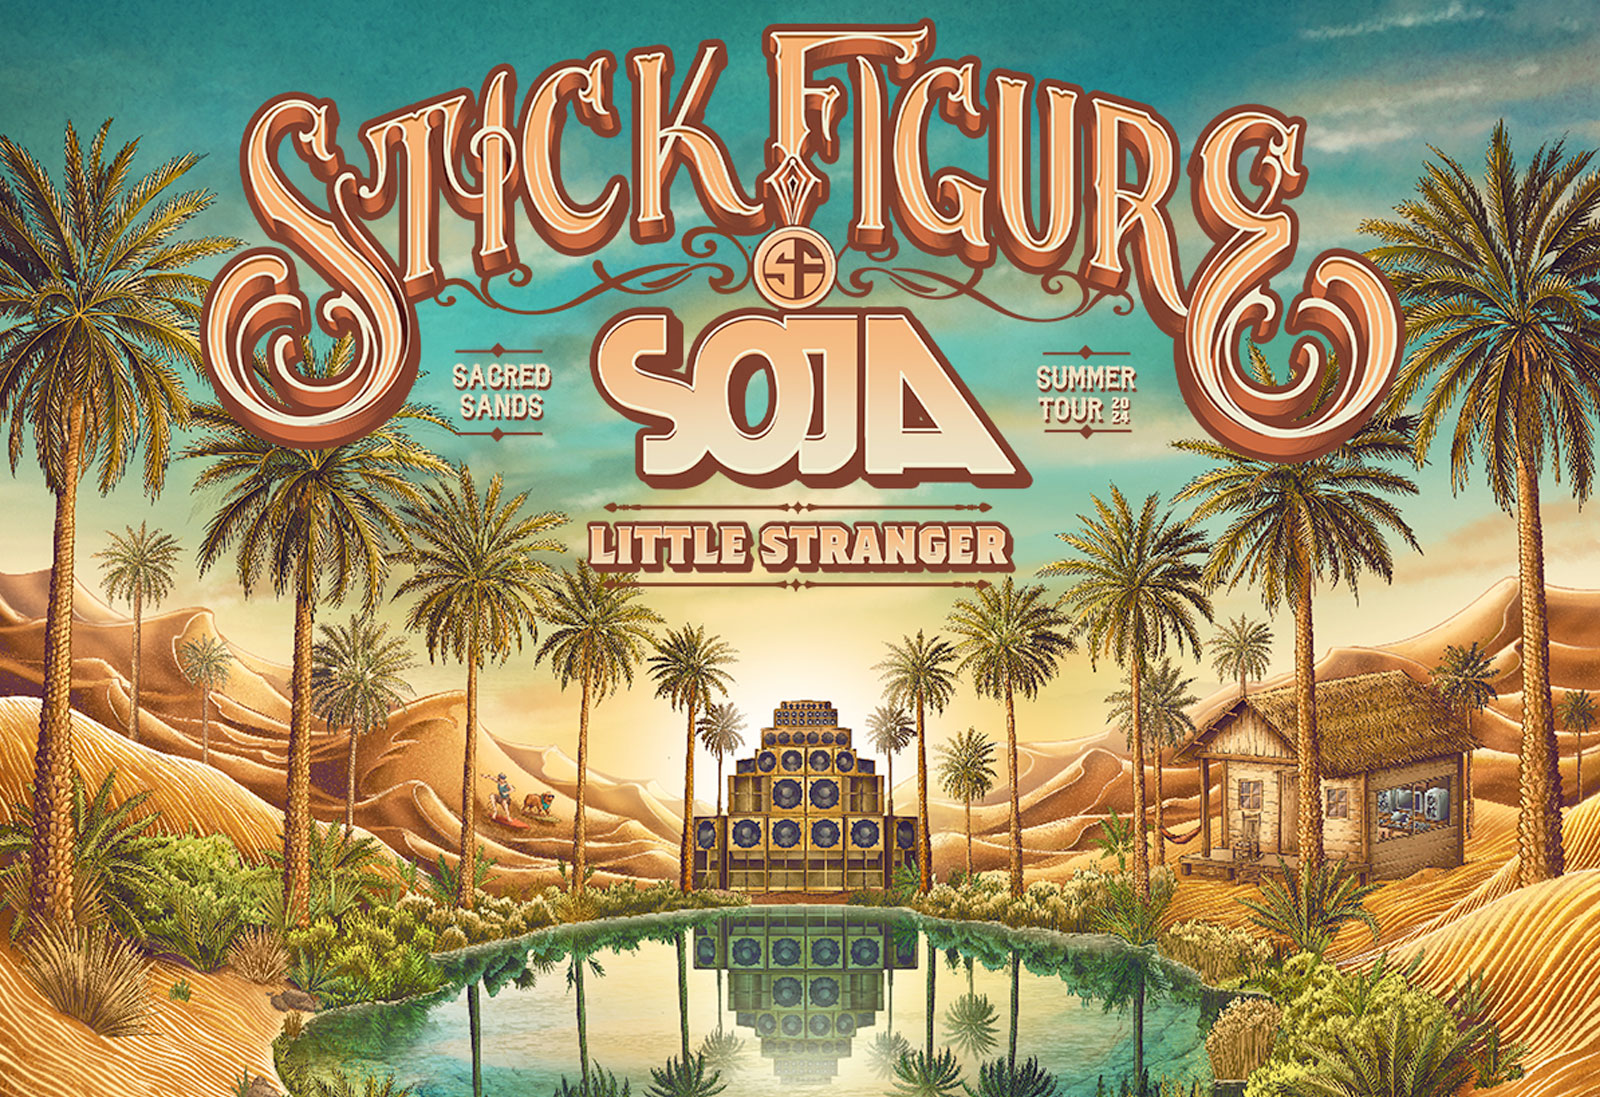 Belly Up presents Stick Figure w/ SOJA July 13 and 14 at Rady Shell